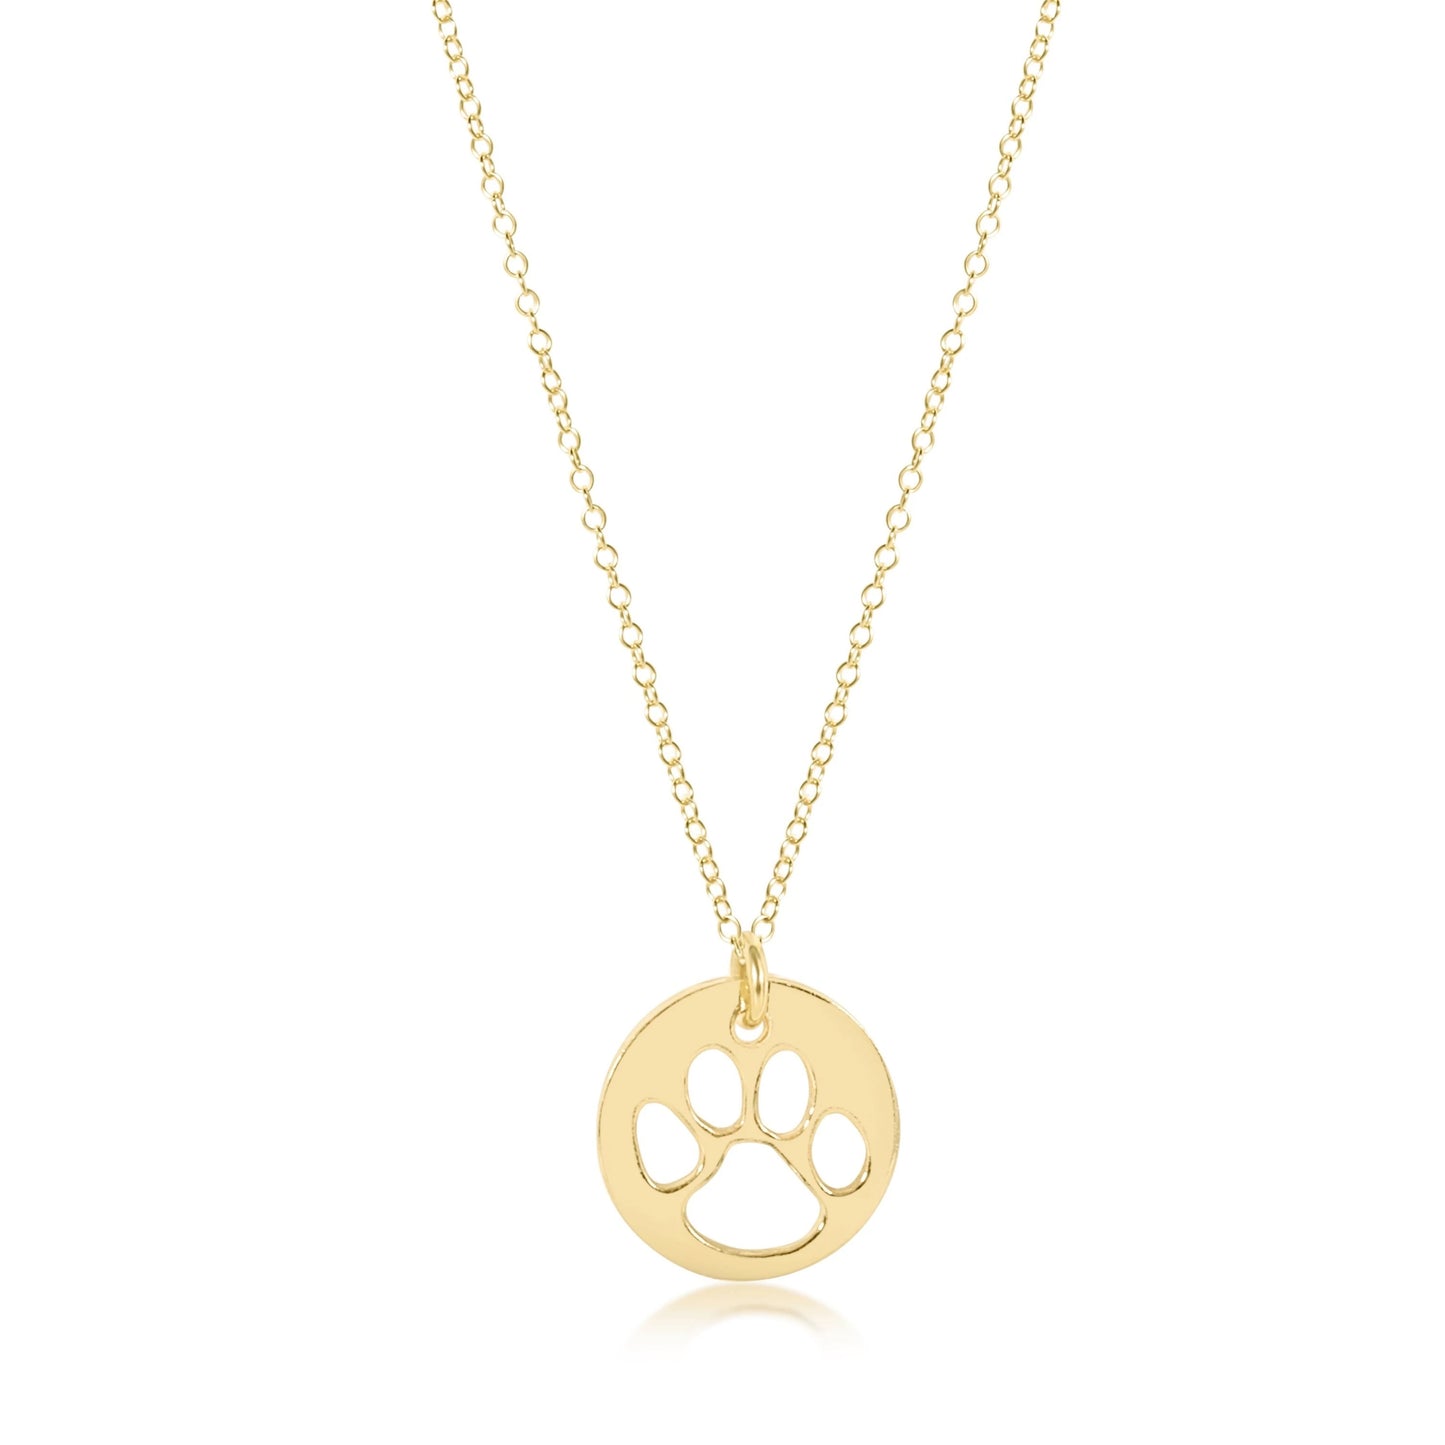 16" NECKLACE- PAW PRINT